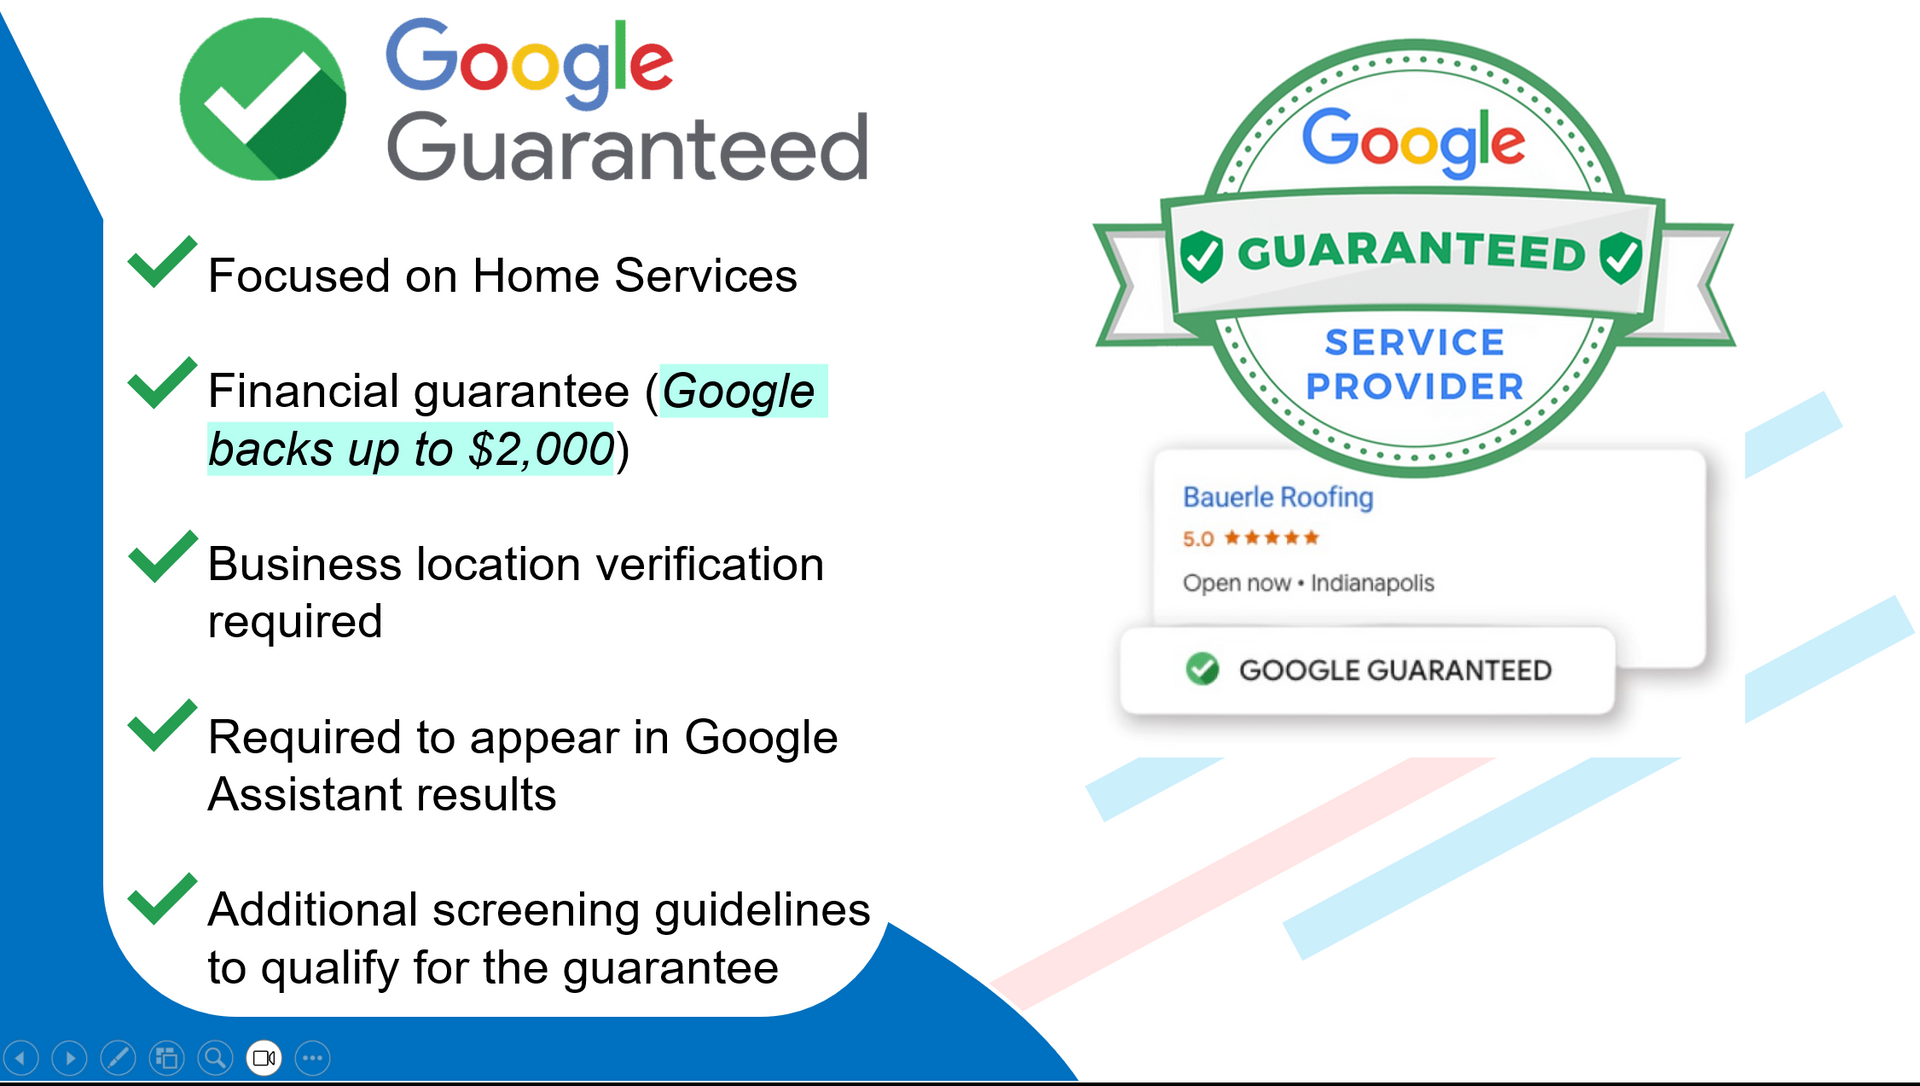 A google guaranteed service provider is focused on home services